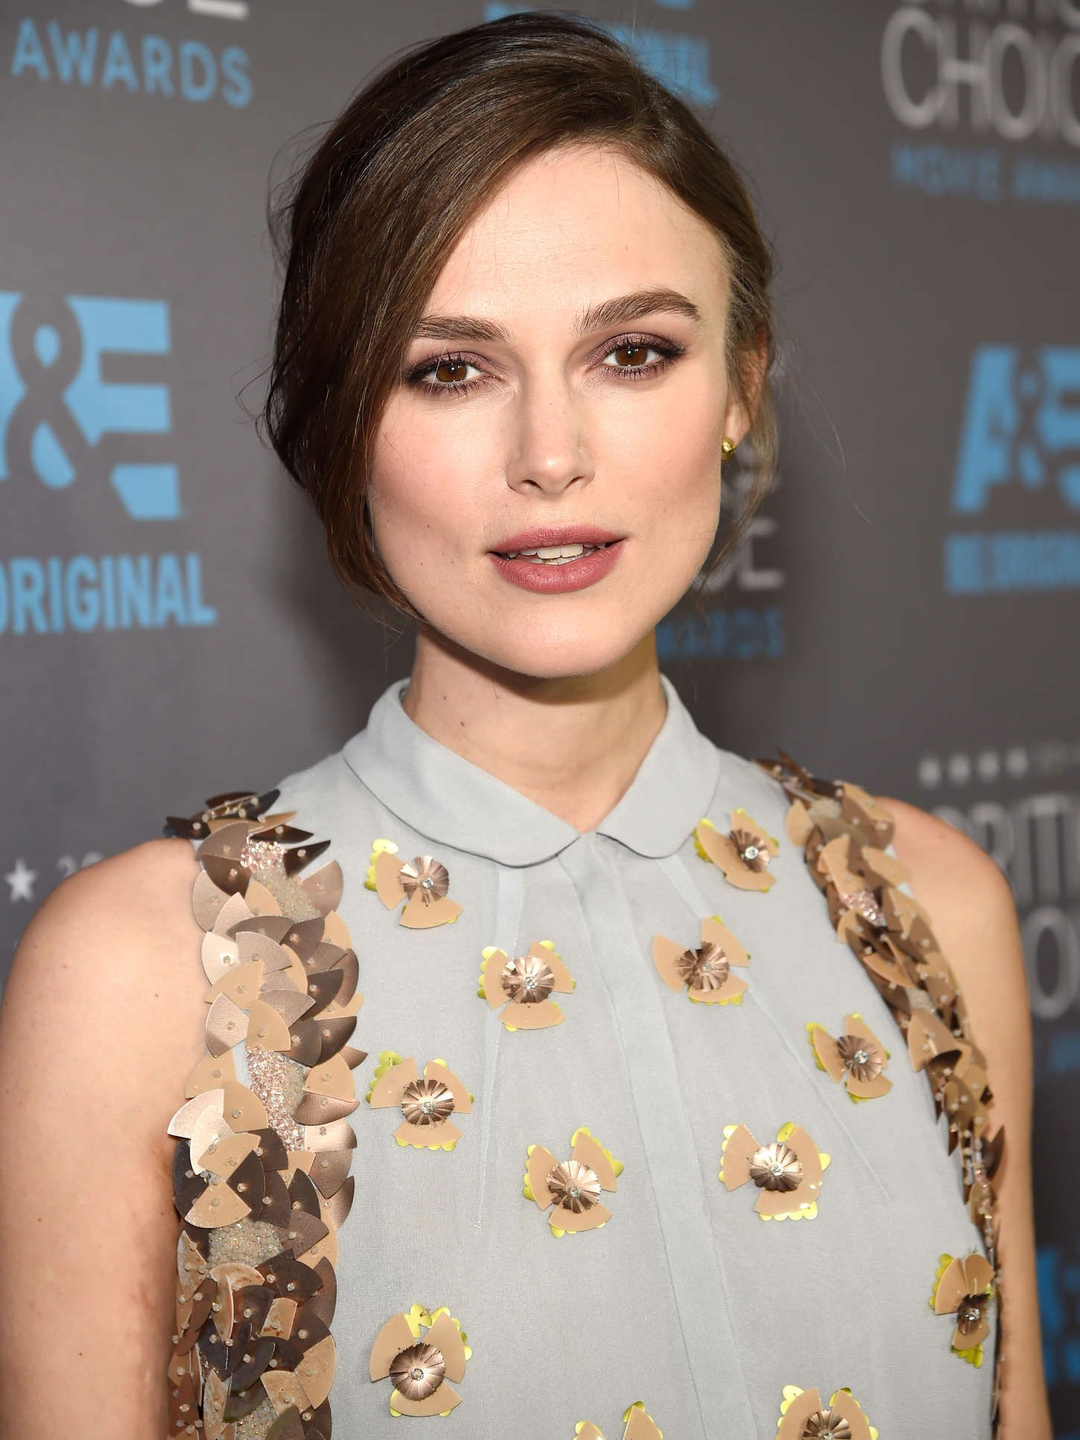 Keira Knightley young age